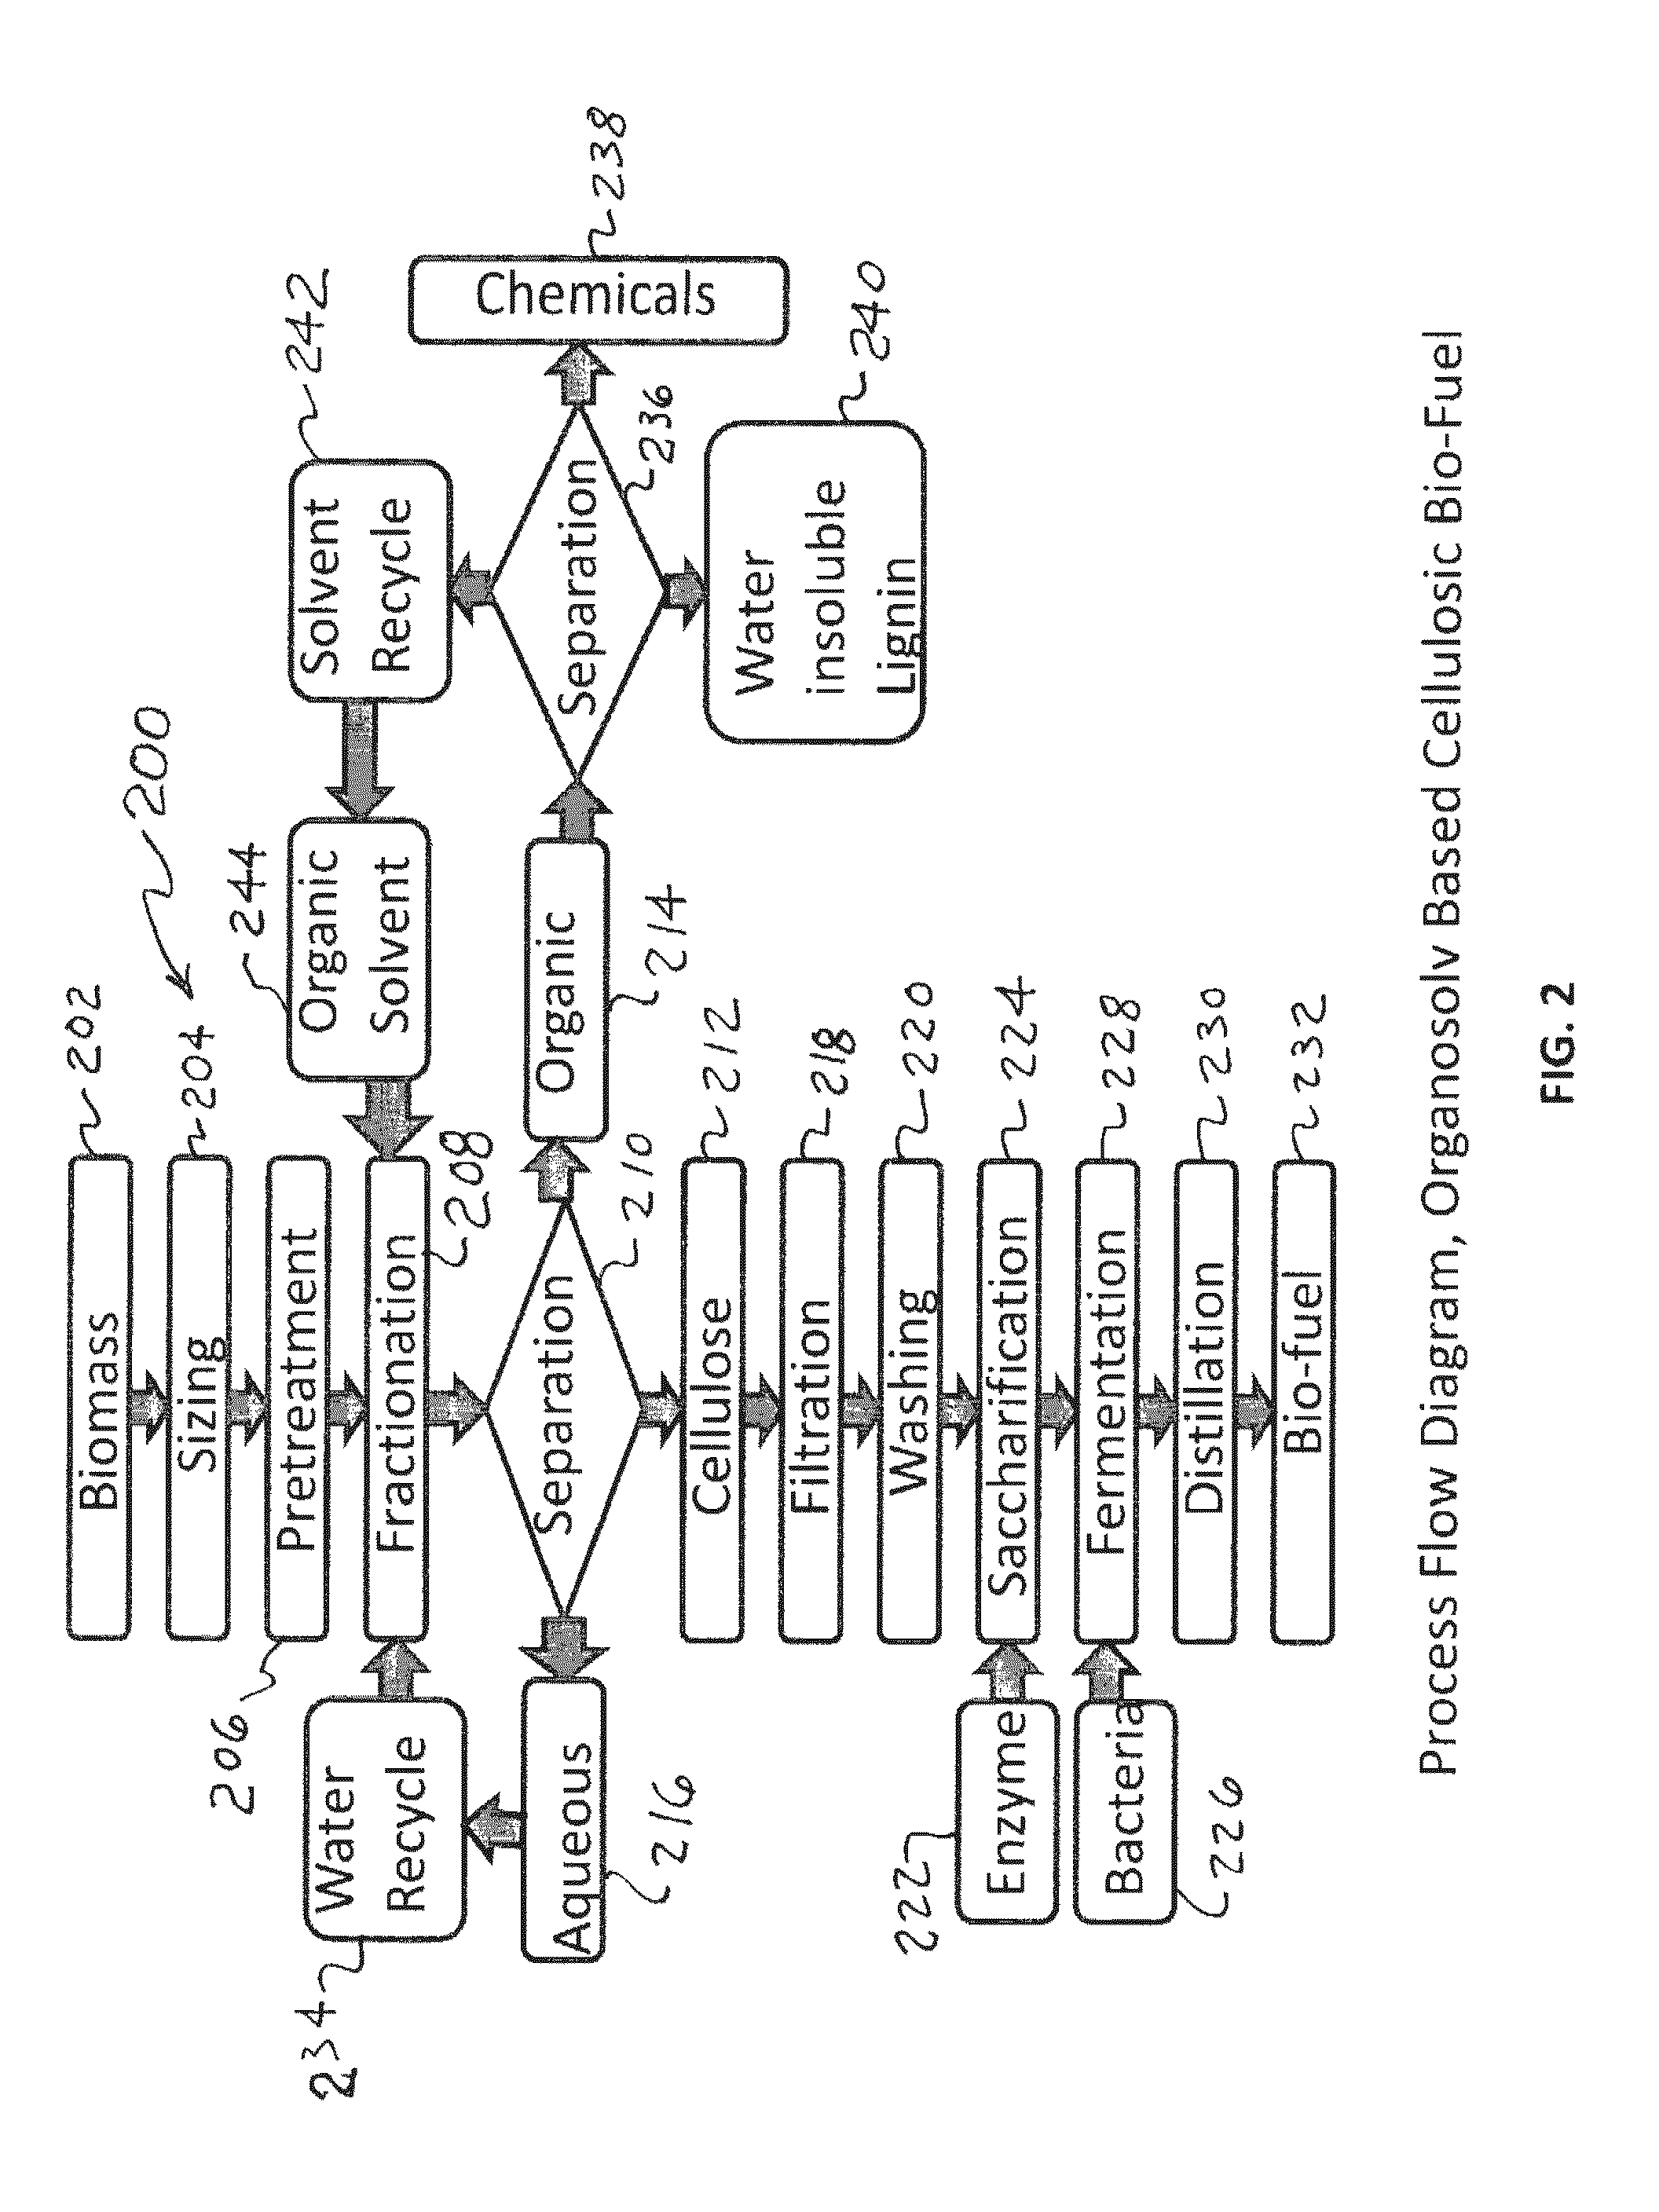 System and method for extraction of chemicals from lignocellulosic materials